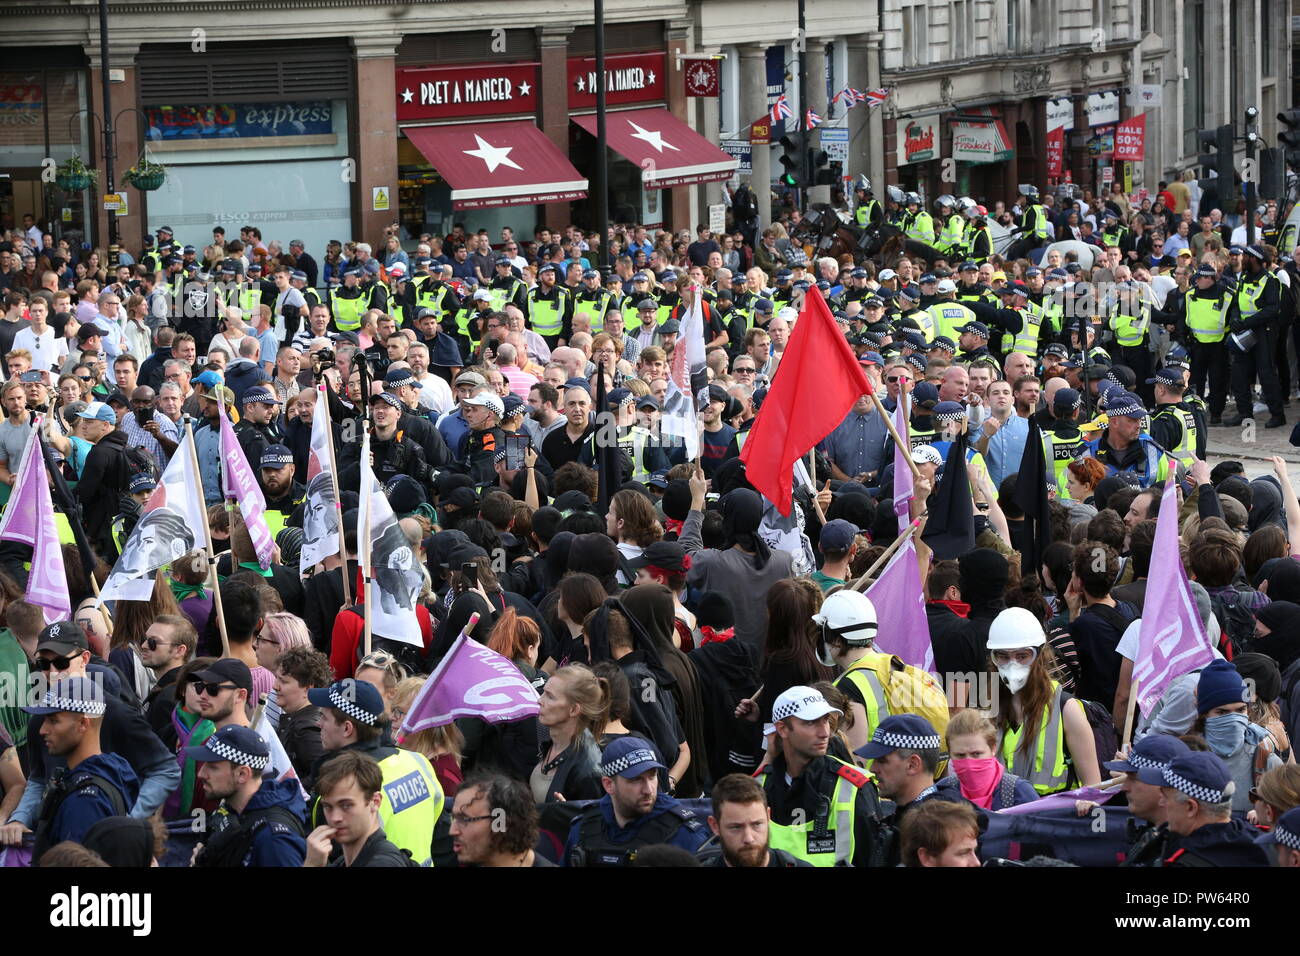 Central London, UK, 13th Oct 2018. Supporters of the the DFLA (Democratic Football Lads Alliance) marching through central London clash with Anti-Fascist groups between Trafalgar Square and Whitehall, under heavy police presence. Police try to establish a visible security line with armoured vans, horses and officers between the two sides. Credit: Imageplotter News and Sports/Alamy Live News Stock Photo